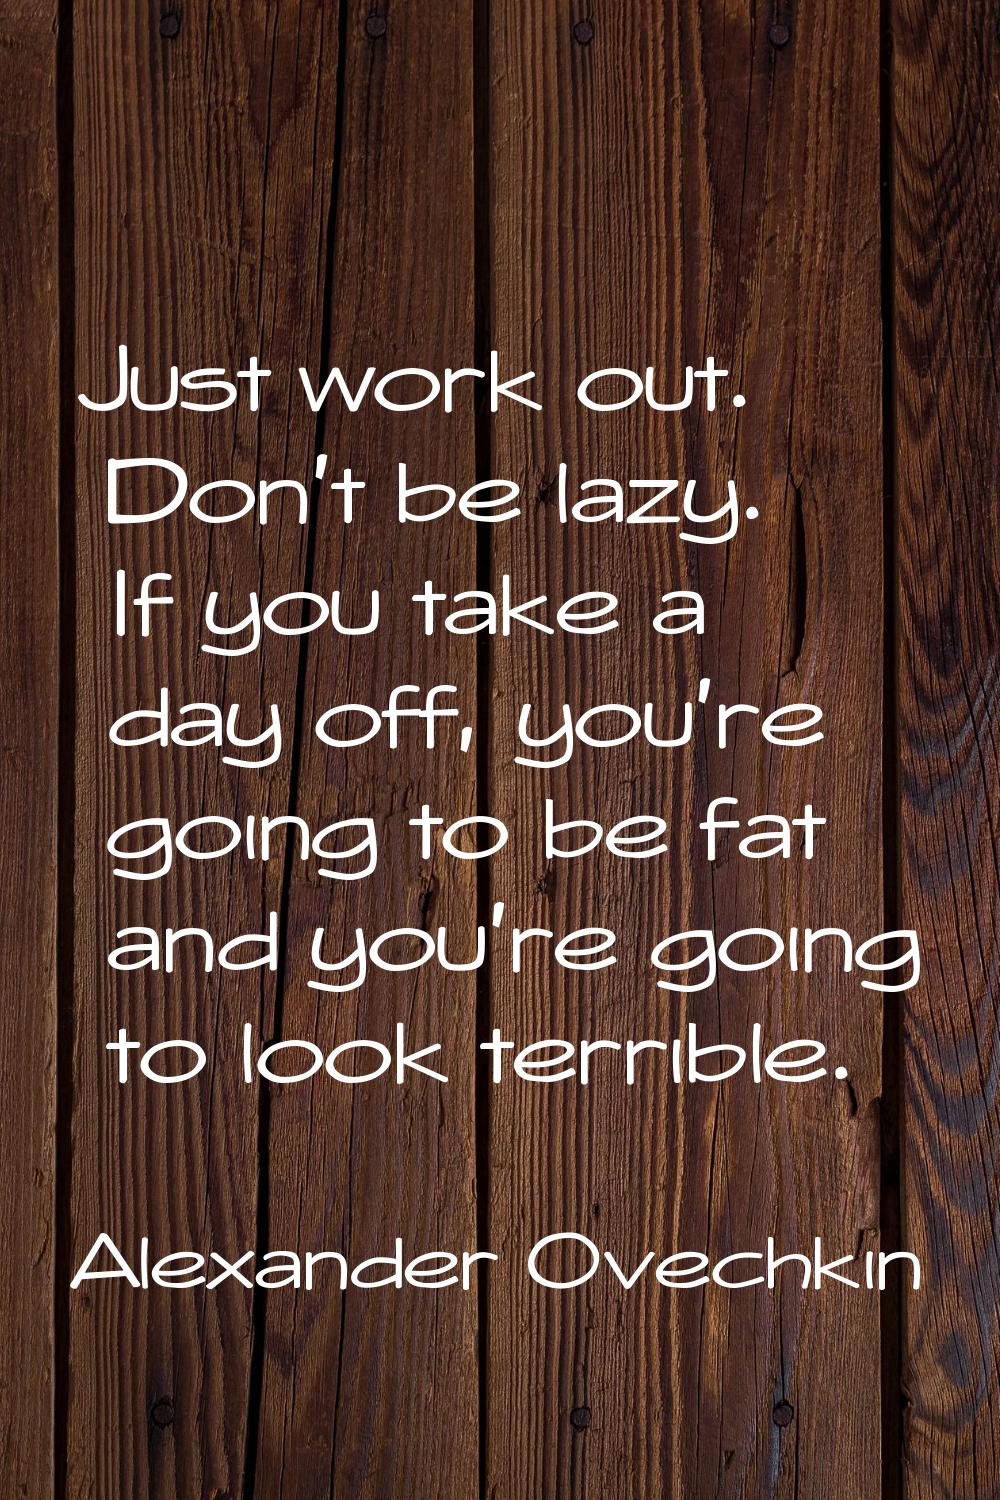 Just work out. Don't be lazy. If you take a day off, you're going to be fat and you're going to loo